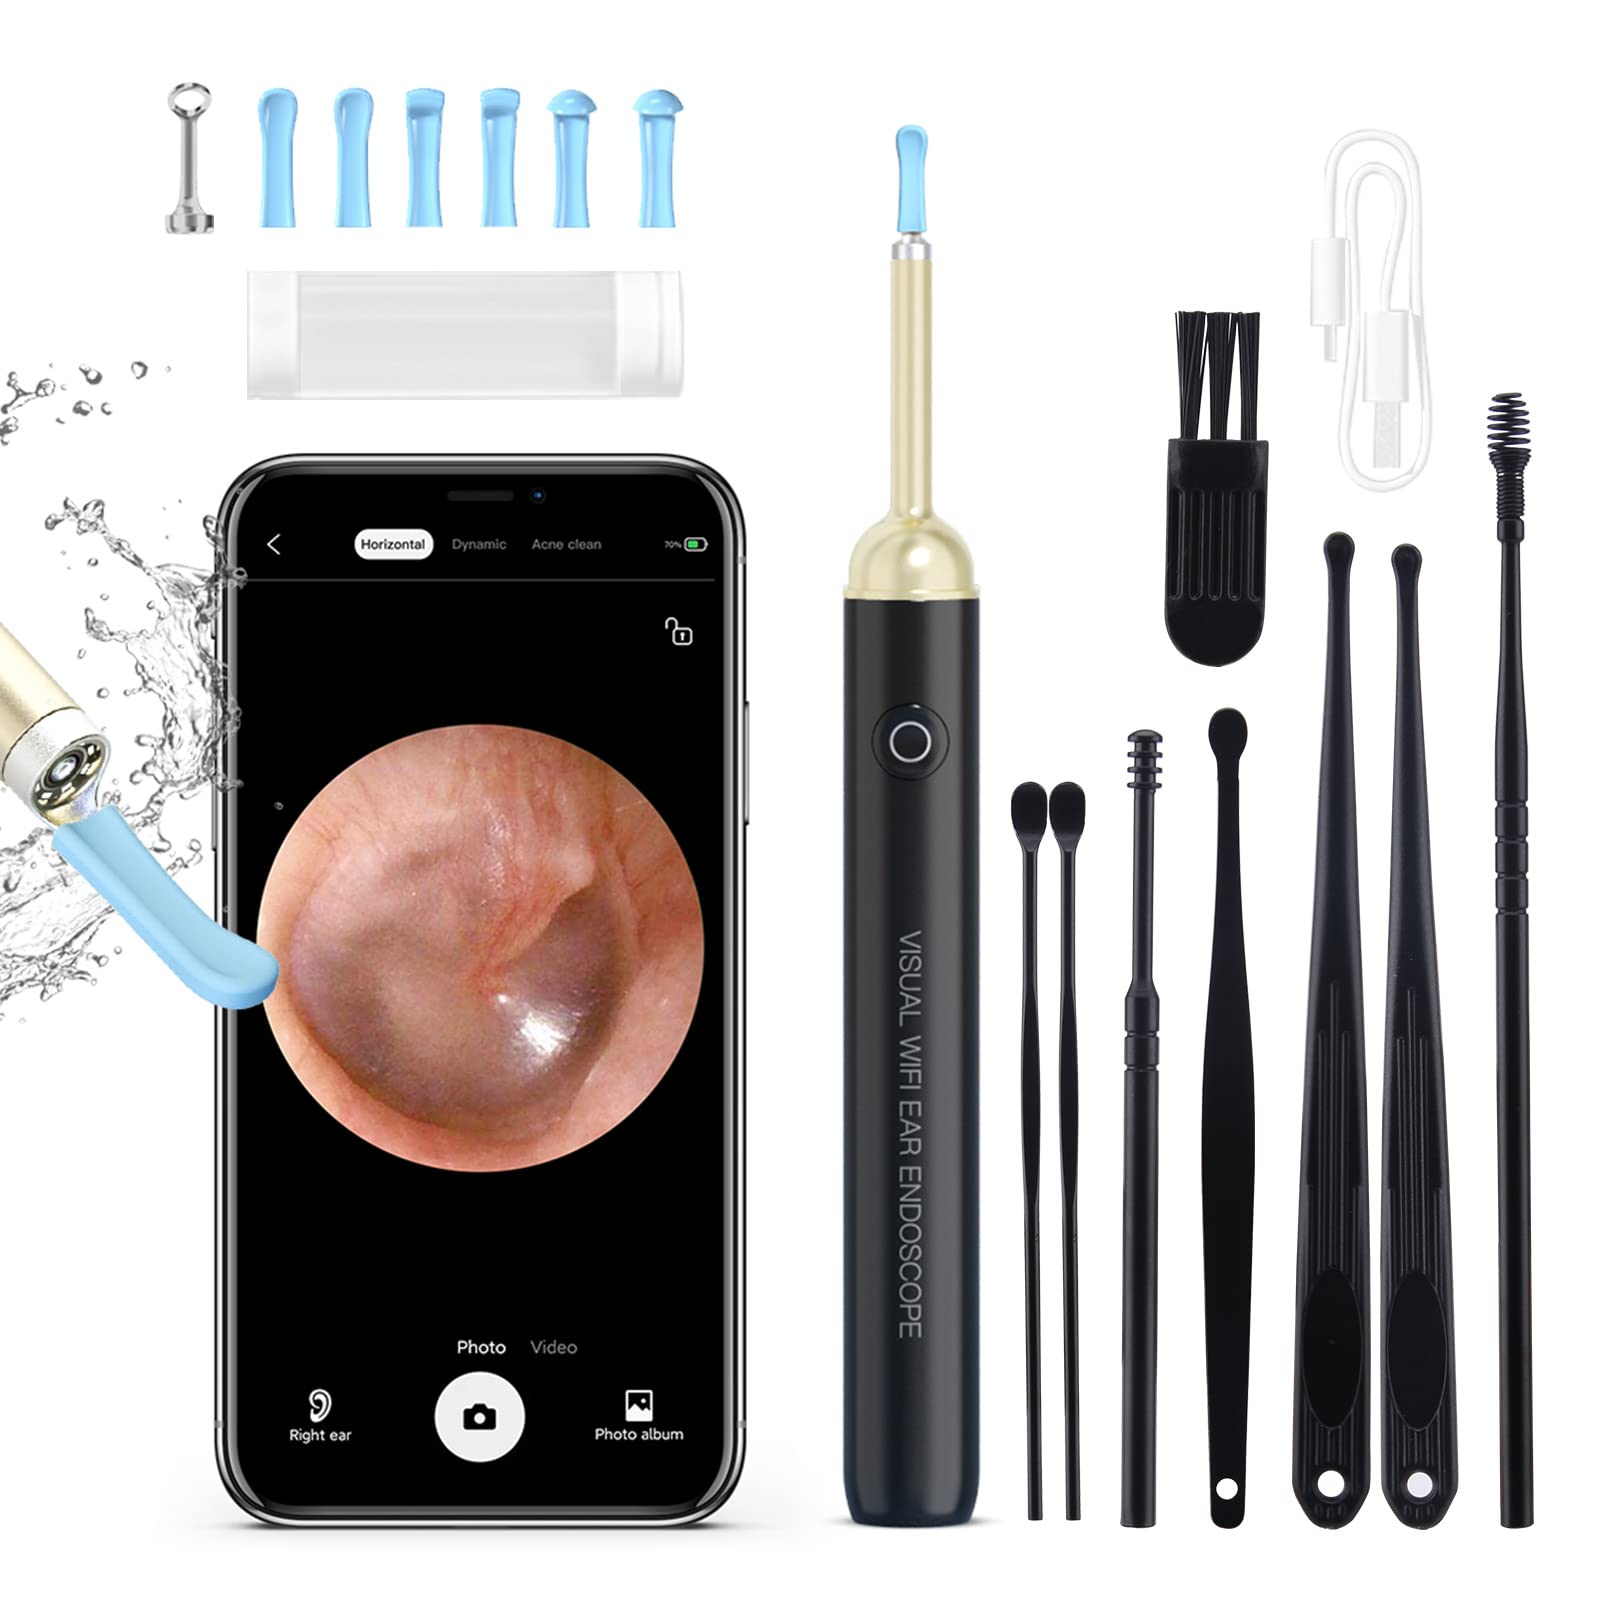 Ear Wax Removal Tool Camera Smart Visual Ear Cleaner 1080P FHD